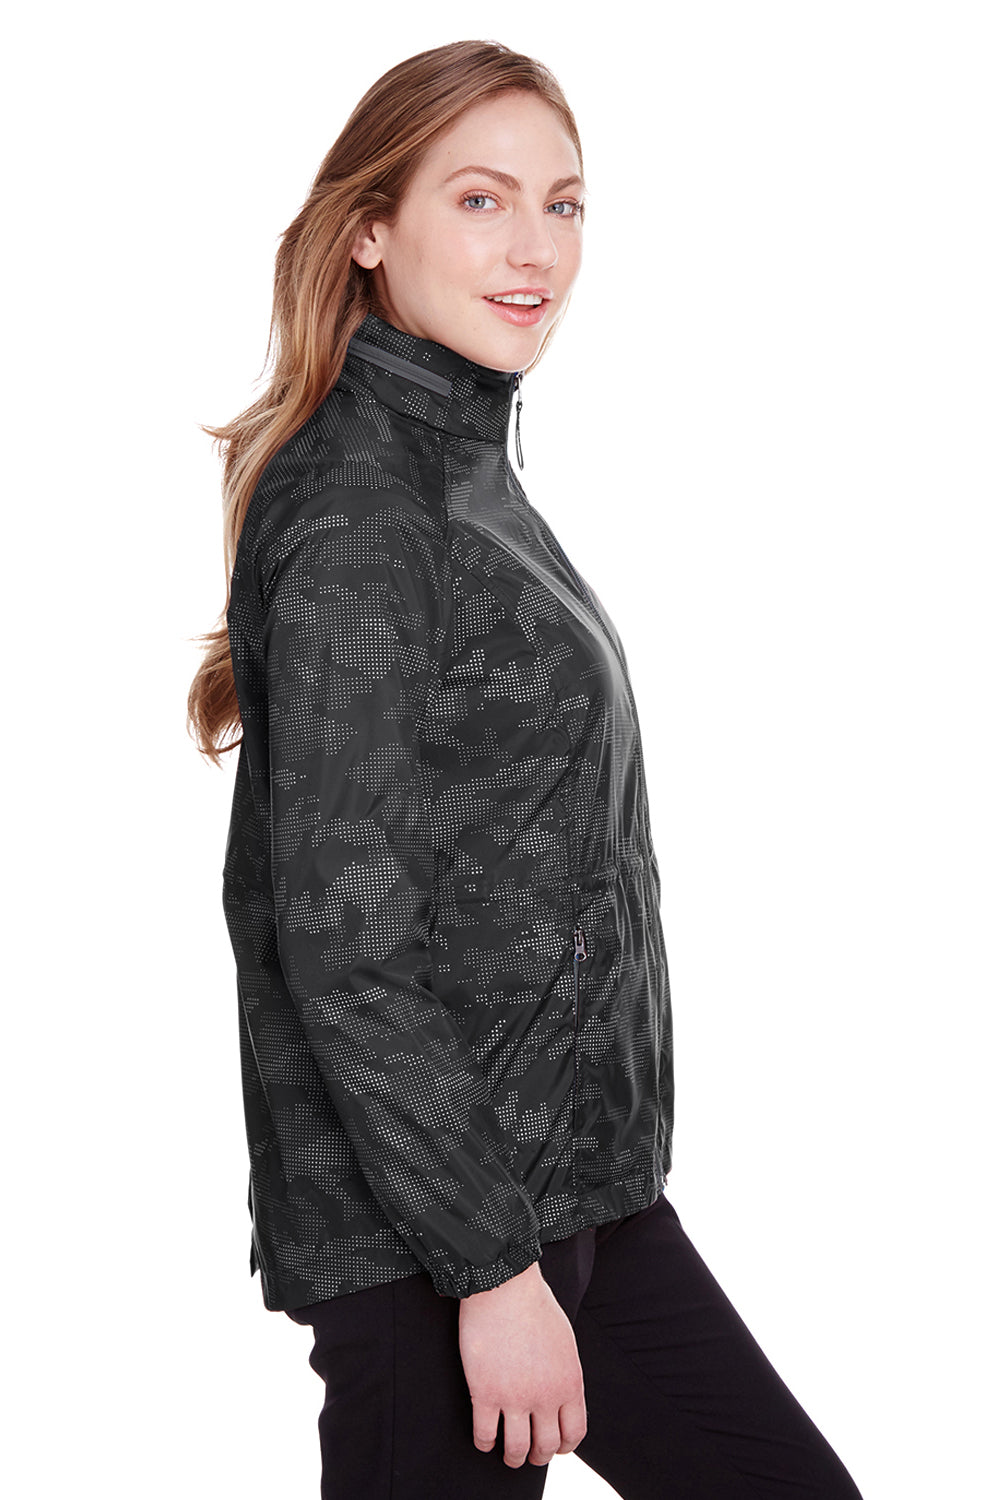 North End NE711W Womens Rotate Reflective Water Resistant Full Zip Hooded Jacket Black/Carbon Grey Side